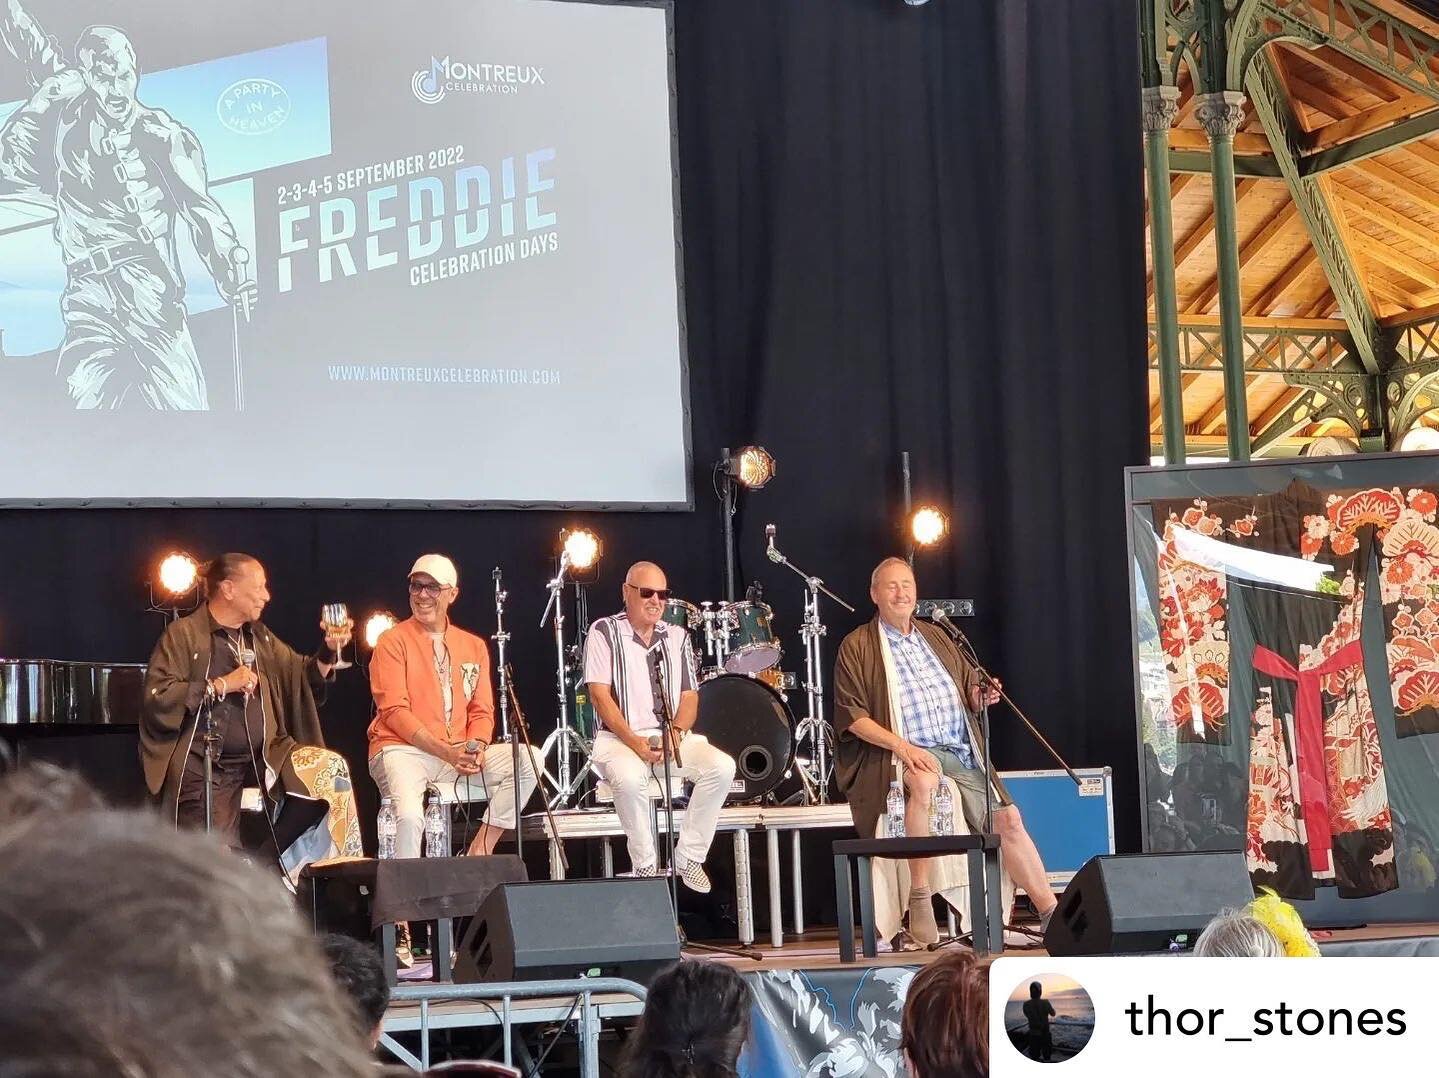 Posted @withregram &bull; @thor_stones Last day @ Freddie Celebration Days 2022 and my good friend Jim Jenkins was on stage today telling some good stories about Freddie Mercury. Great interviews with other gest also. Thierry Amsallem, Peter Straker 